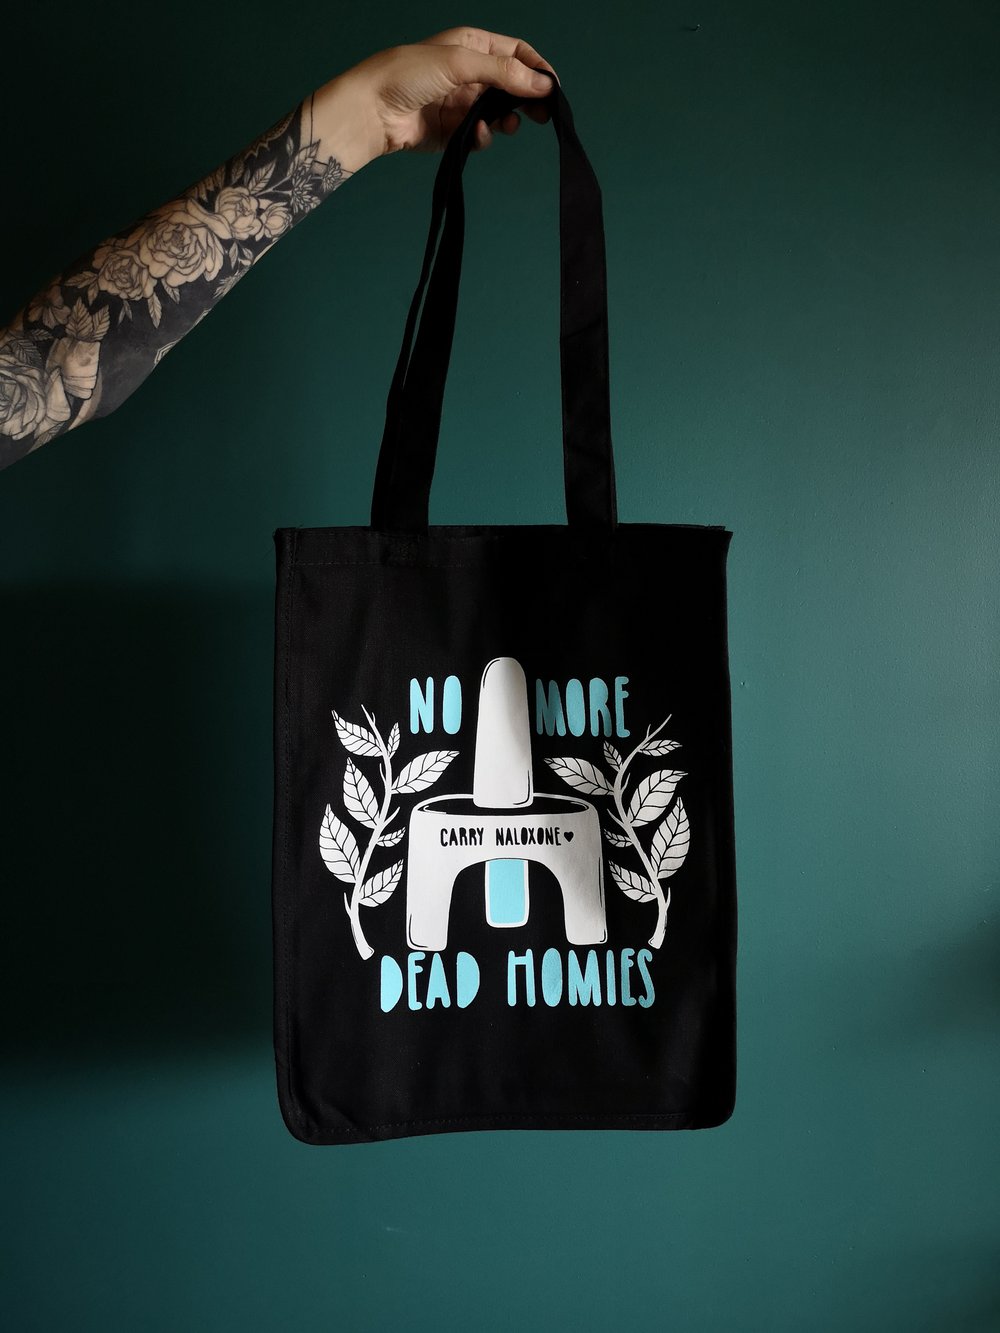 'no more dead homies, carry naloxone' large tote bag 